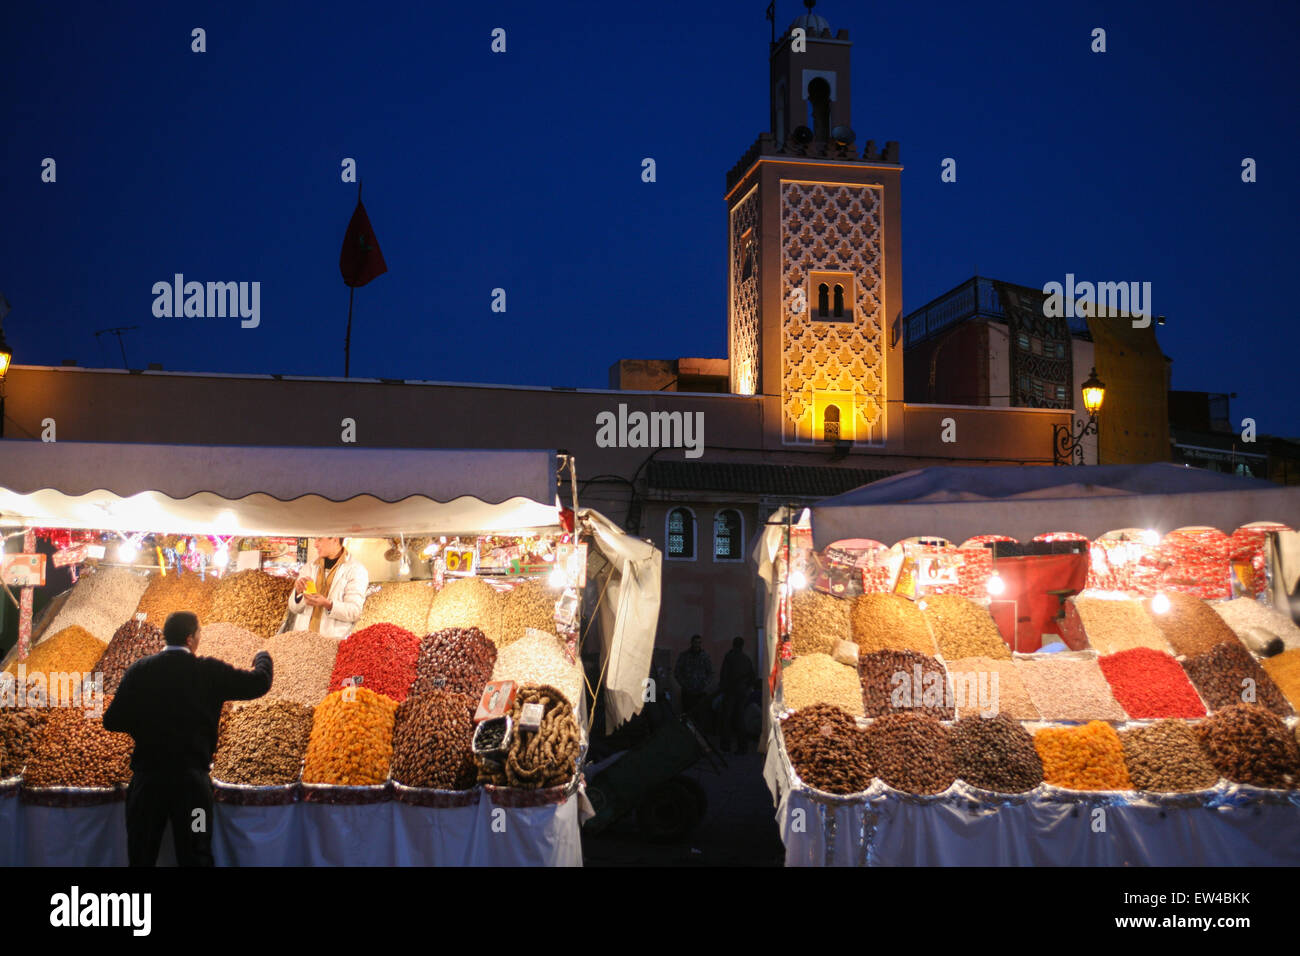 Fruit and nuts for sale at this street stall on,Djemaa, Djamaa El Fna, with mosque in the background, the main square in Marrakesh, Moro Stock Photo